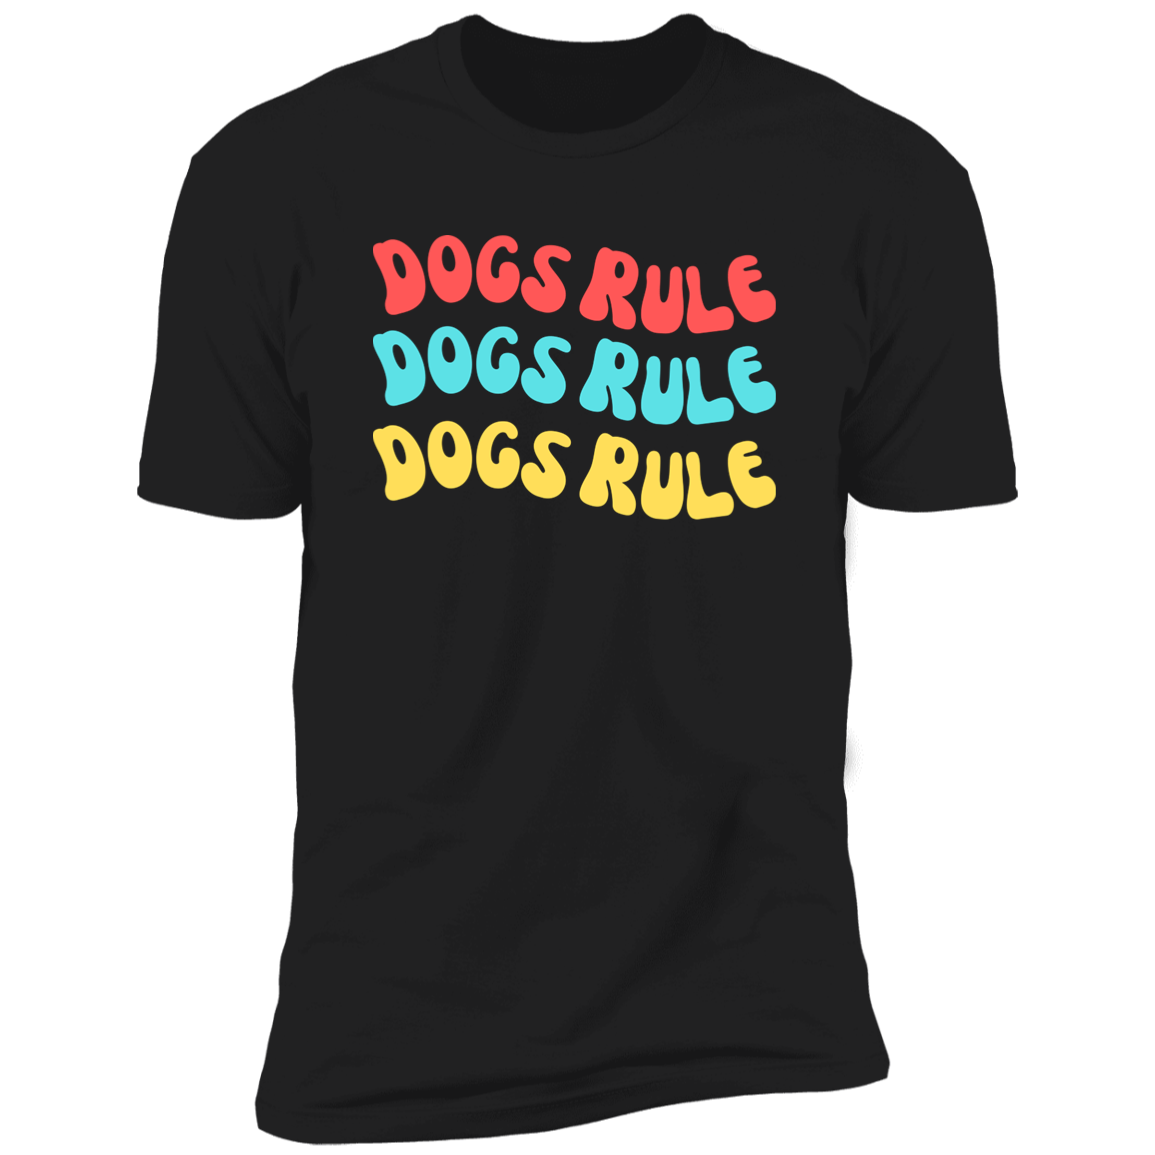 Dogs Rule Dog Shirt, dog shirt for humans, dog mom and dog dad shirt, in black